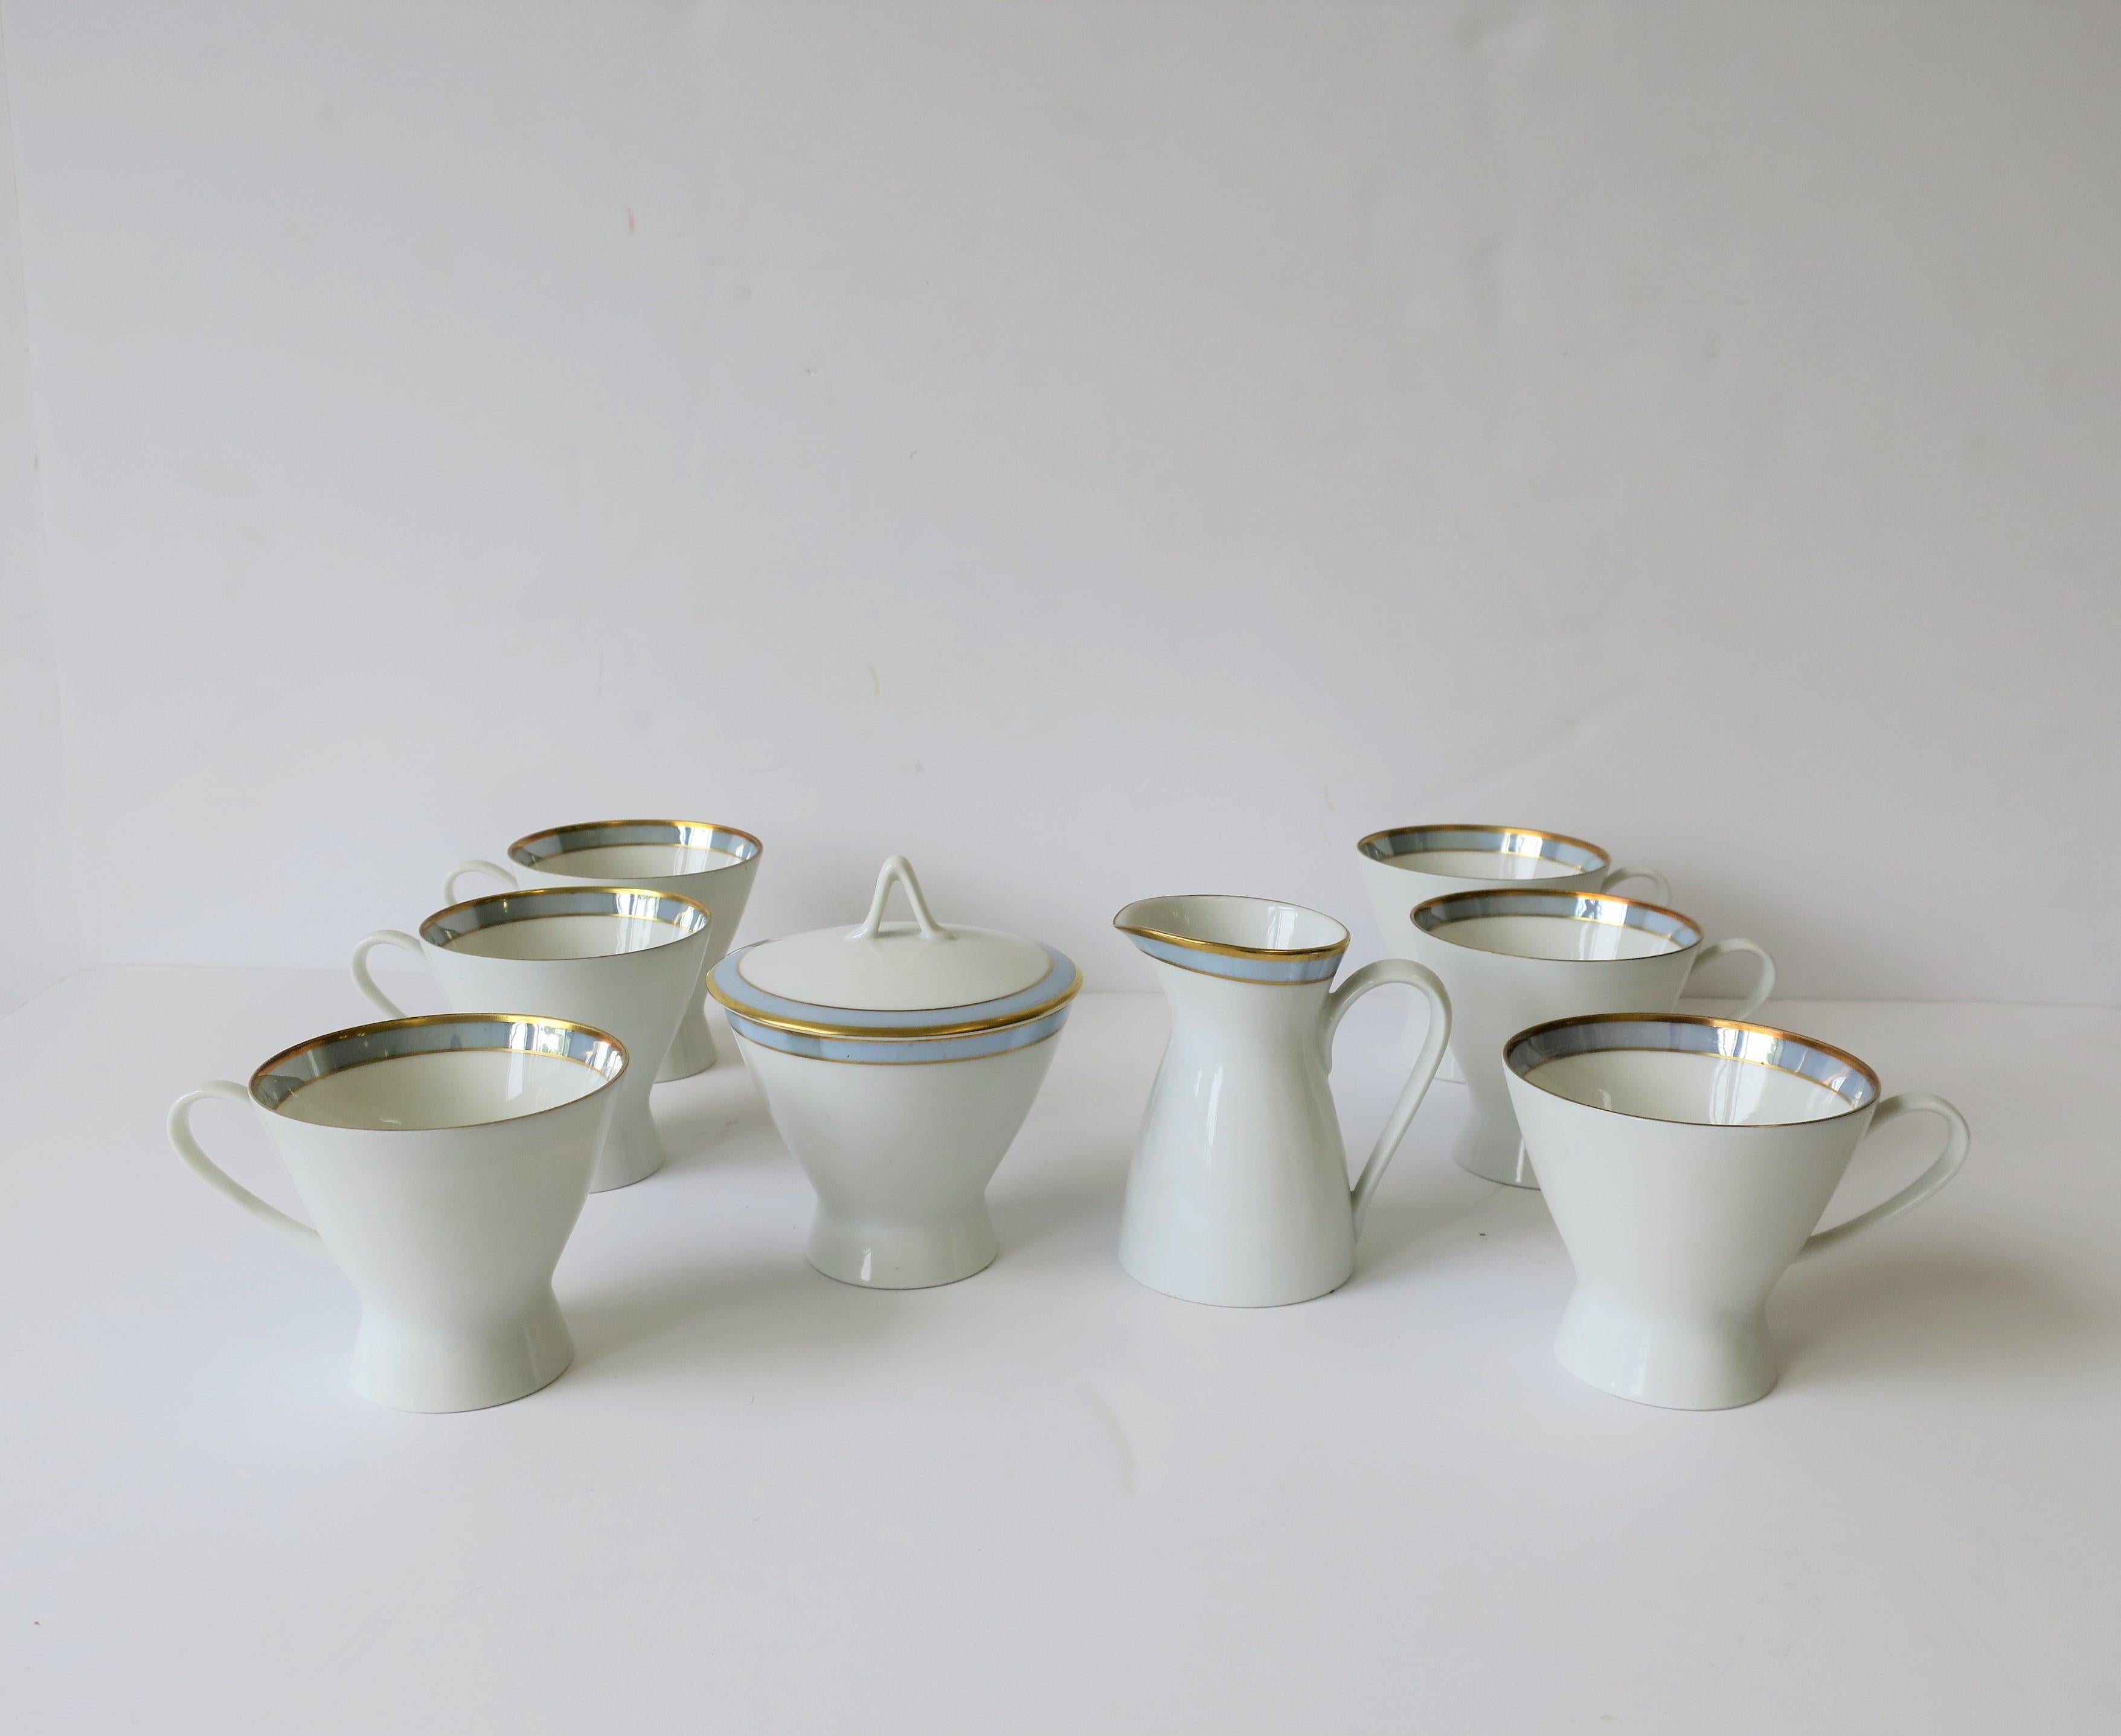 A beautiful German porcelain coffee or tea cup set, with creamer and sugar, in white with touches of gold and blue. Set includes six cups, one creamer and one sugar bowl with lid, all by Rosenthal, Germany, circa mid-20th century. Marker's mark on